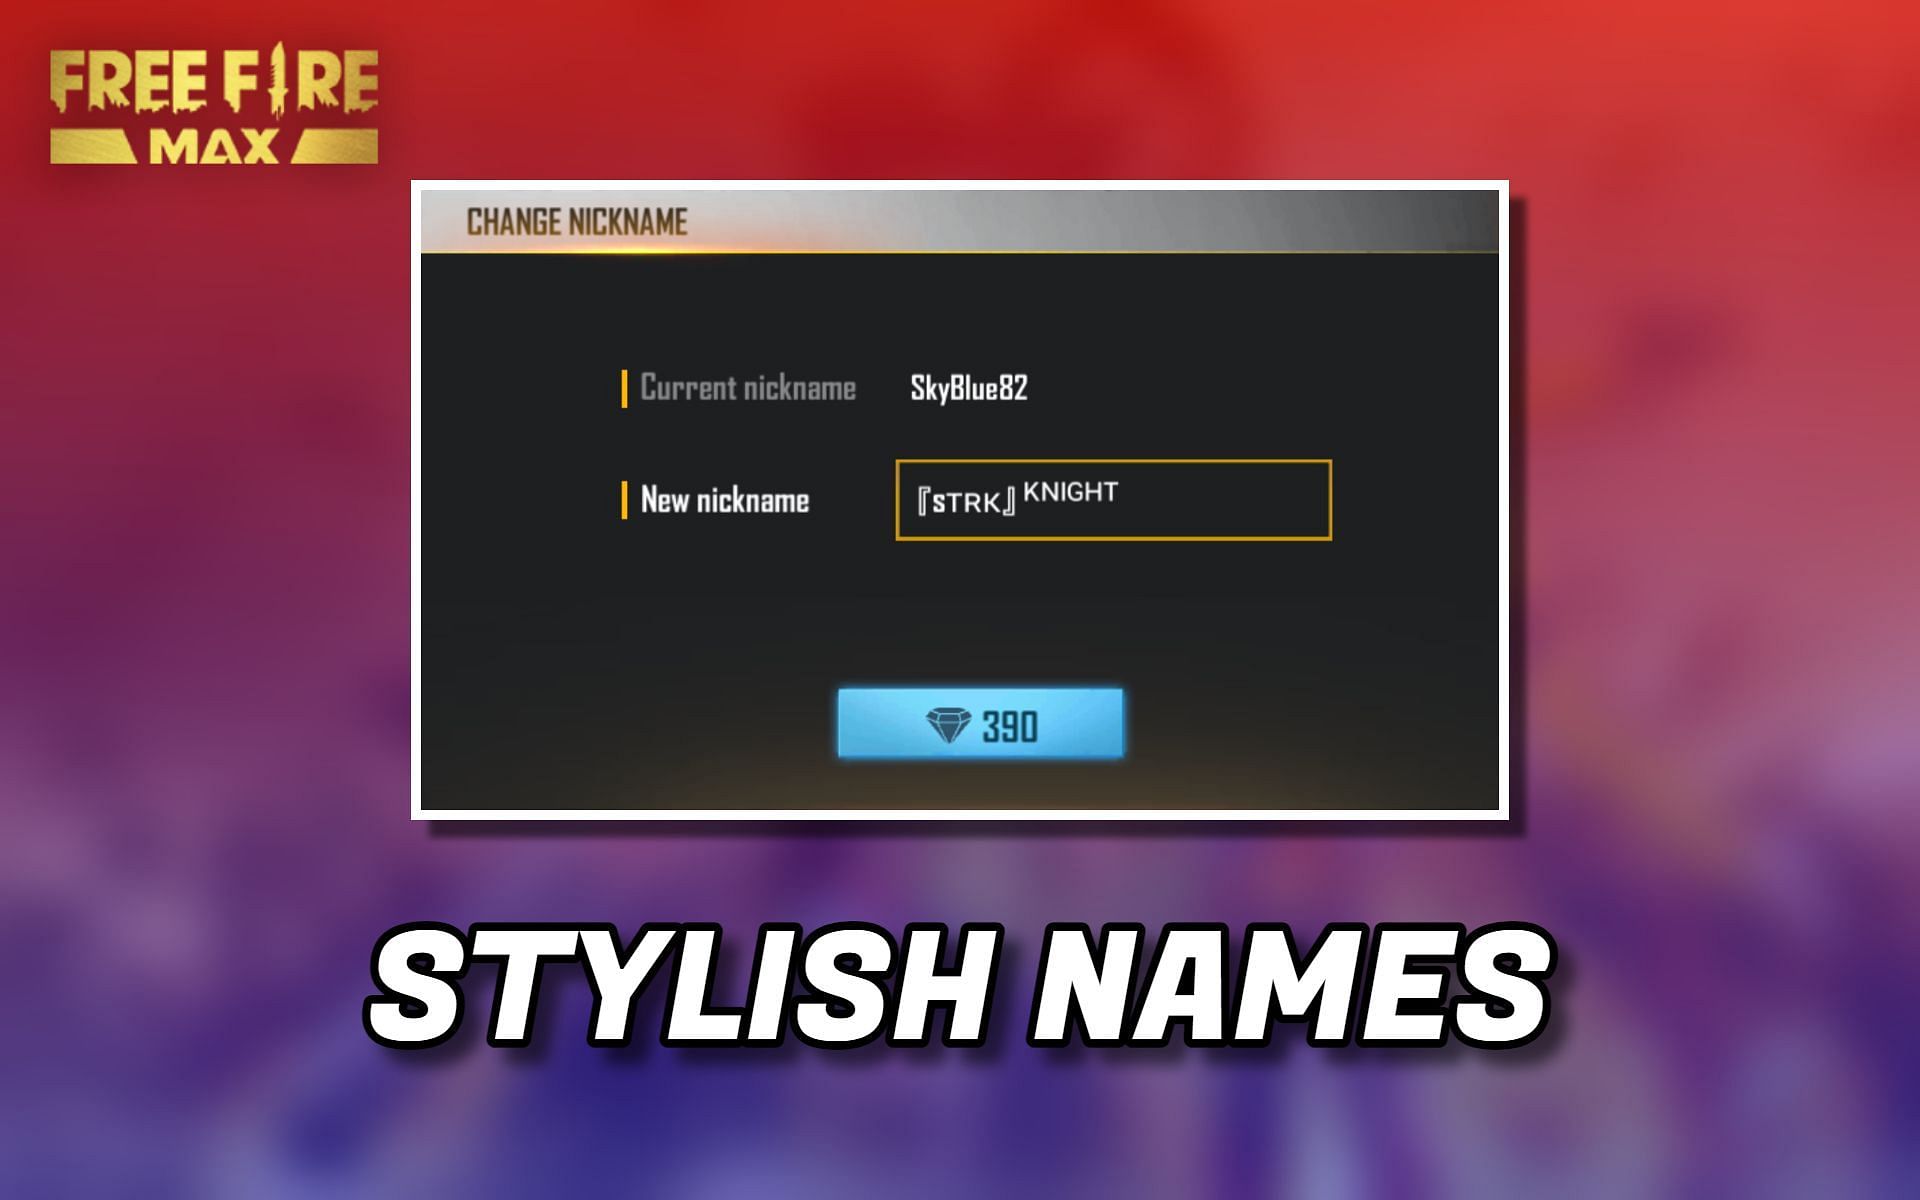 Stylish names can be easily created by Free Fire players (Image via Sportskeeda)